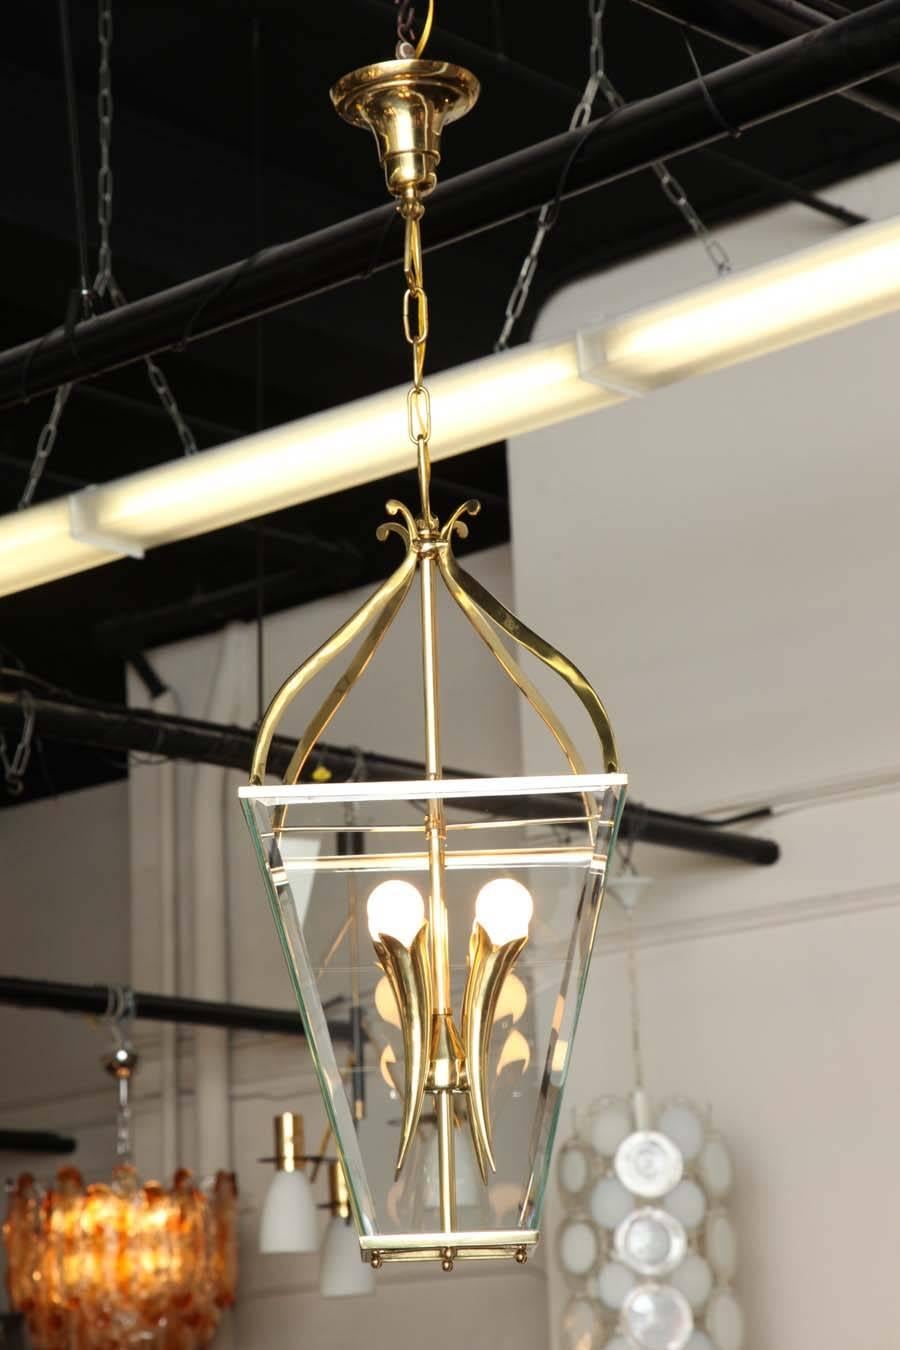 Stylish lantern chandelier made in Milan, 1940 by Brusotti, beautifully made brass frame with four cornucopias with beveled glass, very unusual. 